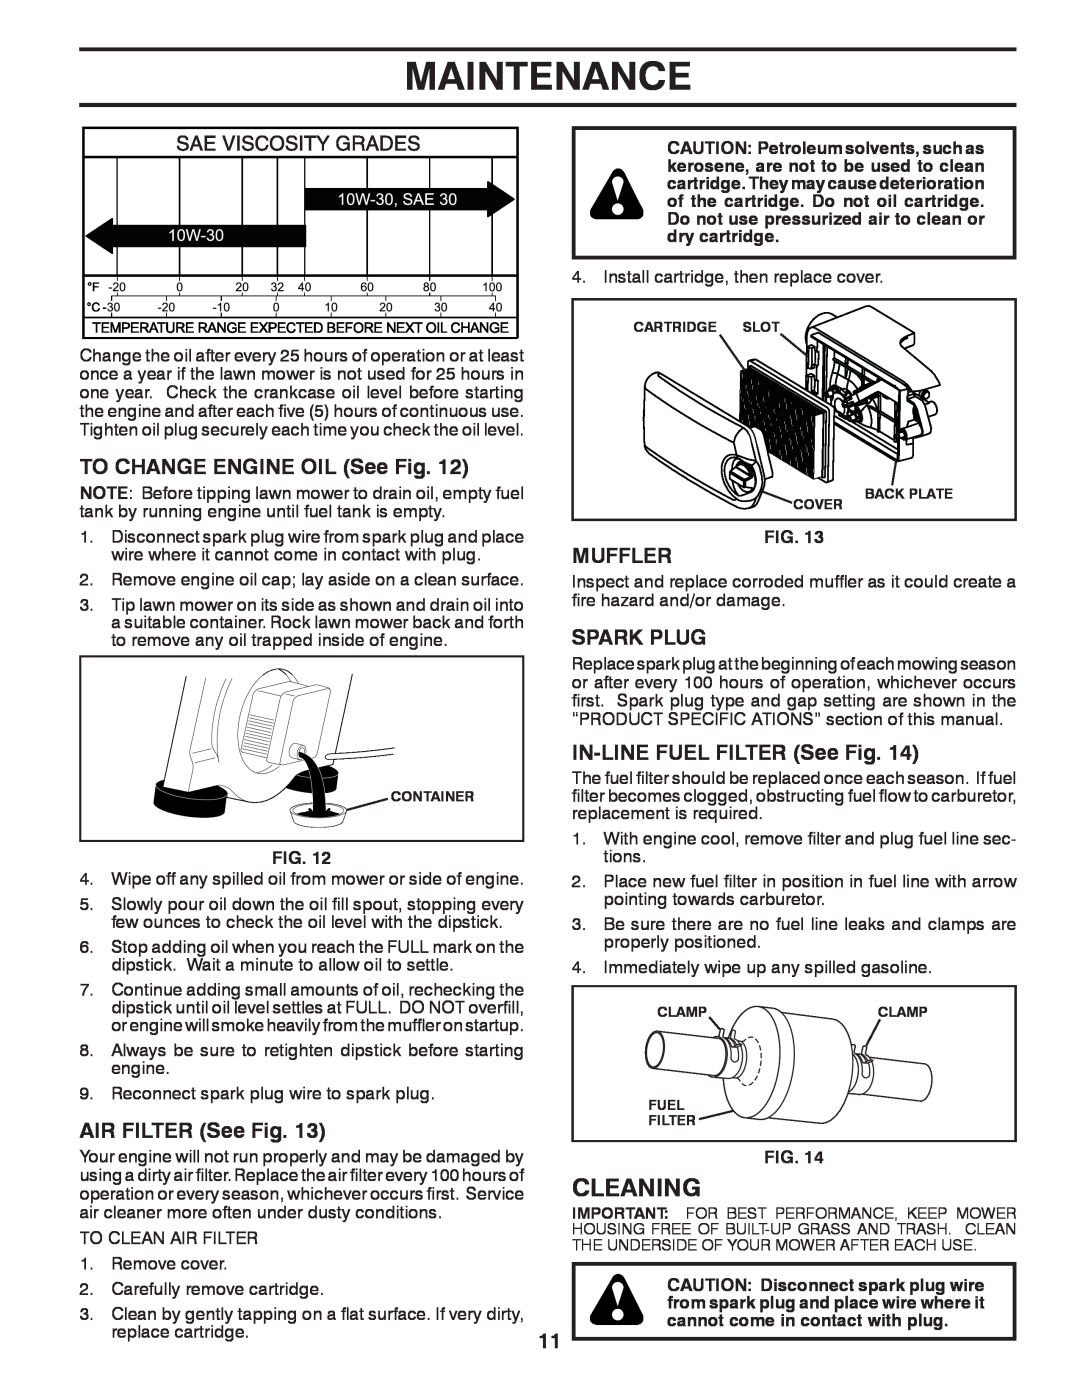 Husqvarna XT722FE owner manual Cleaning, TO CHANGE ENGINE OIL See Fig, Muffler, AIR FILTER See Fig, Spark Plug, Maintenance 